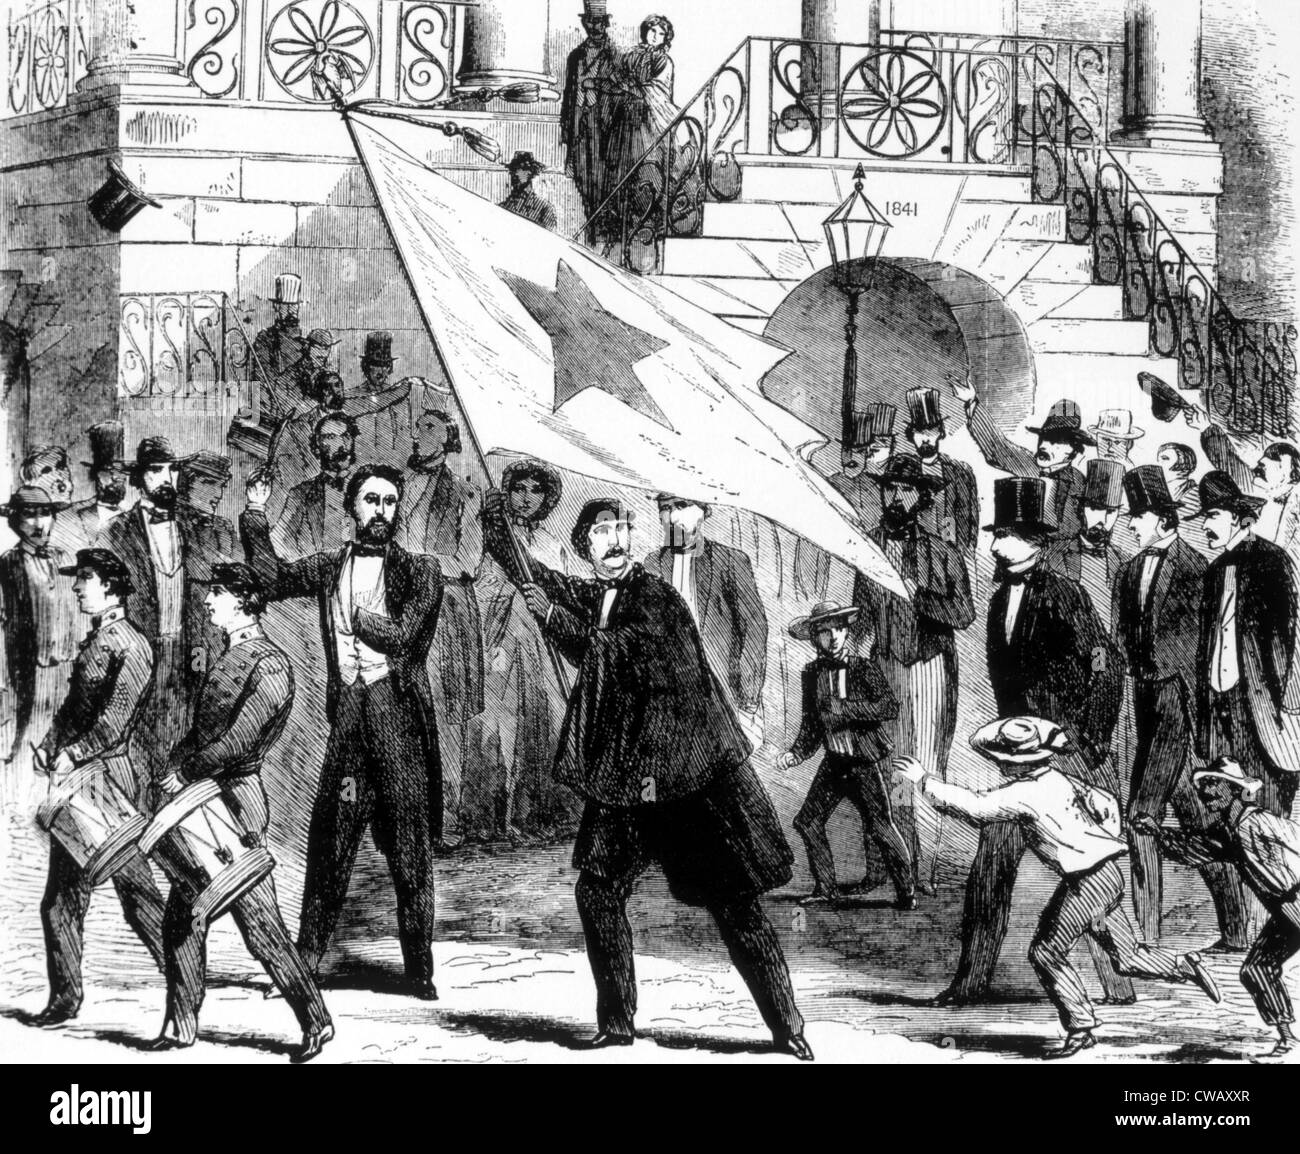 The first states rights flag unfurled by secessionists in Columbia, South Carolina, 1860 Stock Photo